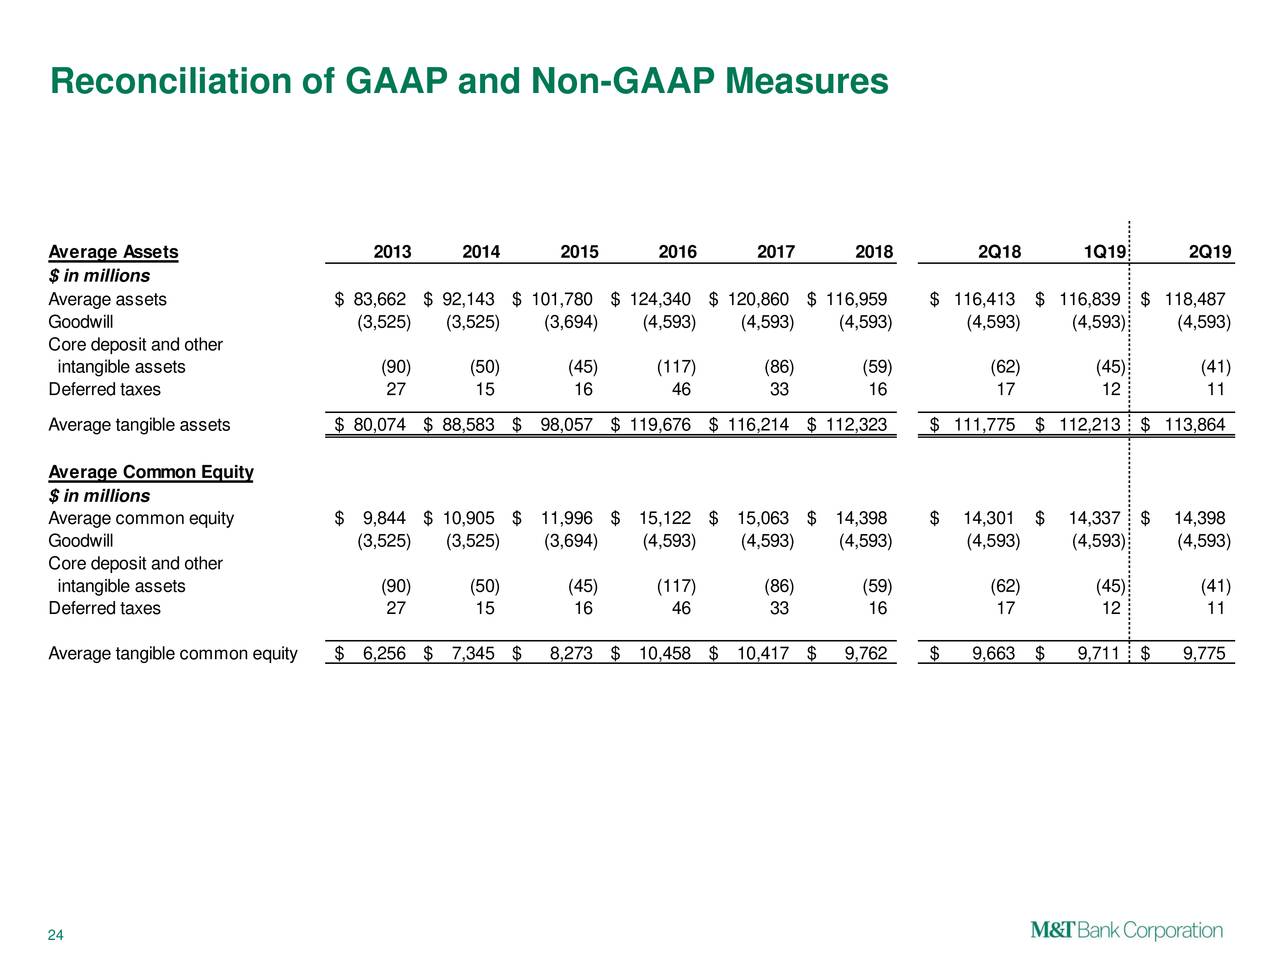 Reconciliation of GAAP and Non-GAAP Measures